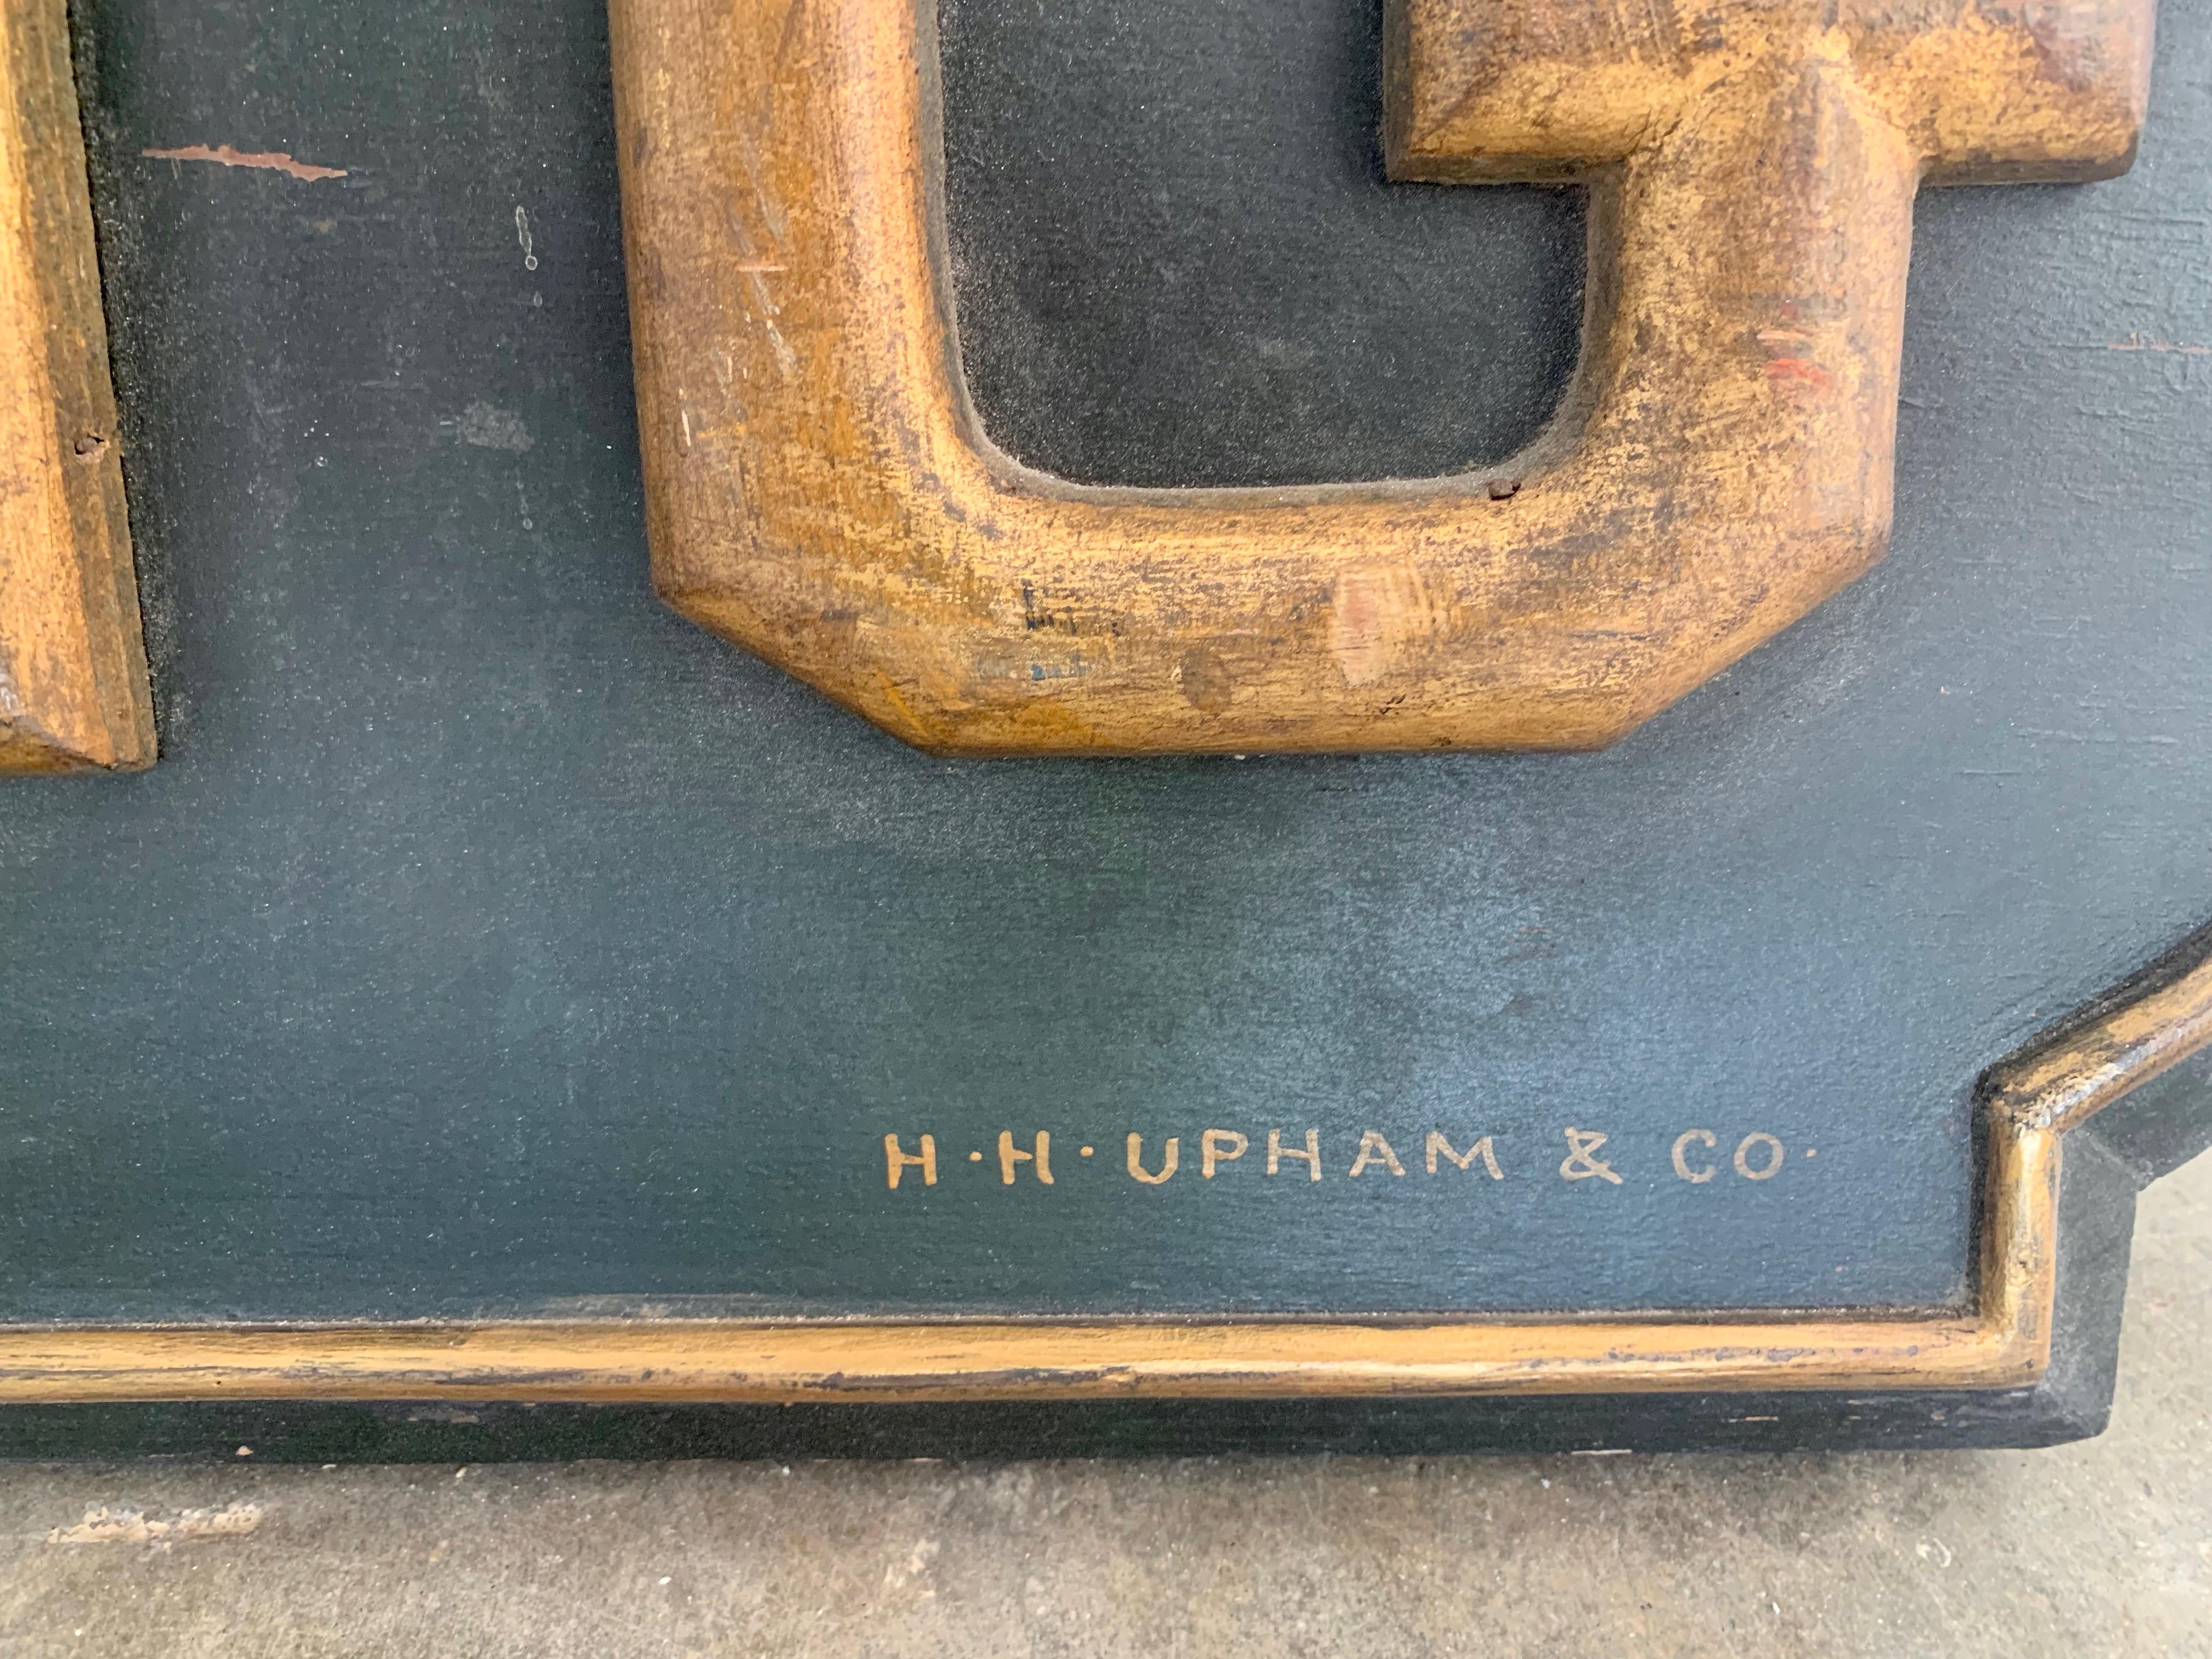 Monumental hand carved wood sign from the 1930s. Made by H.H. Upham & Co. Interestingly, this company owned a huge sign manufacturing business in the city and owned the building they worked out of. Great period piece. Black sign with hand painted